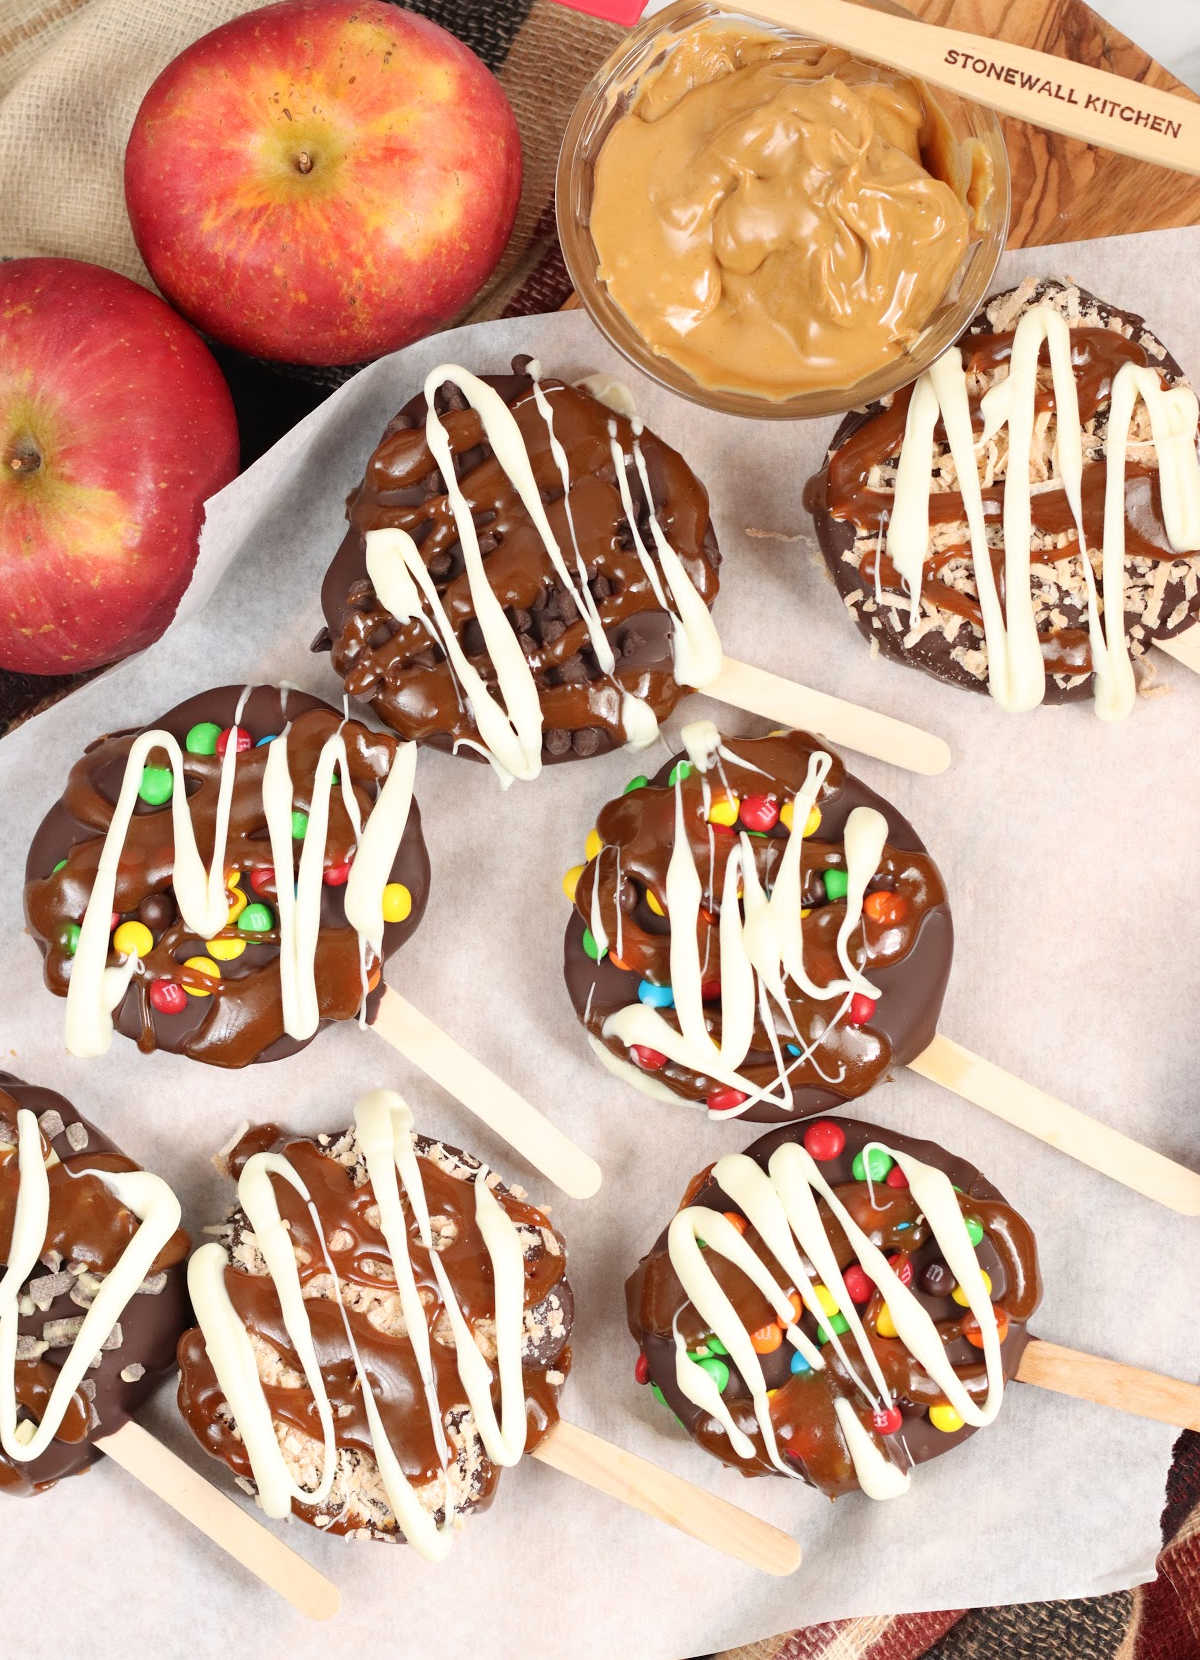 Caramel apple slices covered in chocolate and candies, toasted coconut on sheet pan.